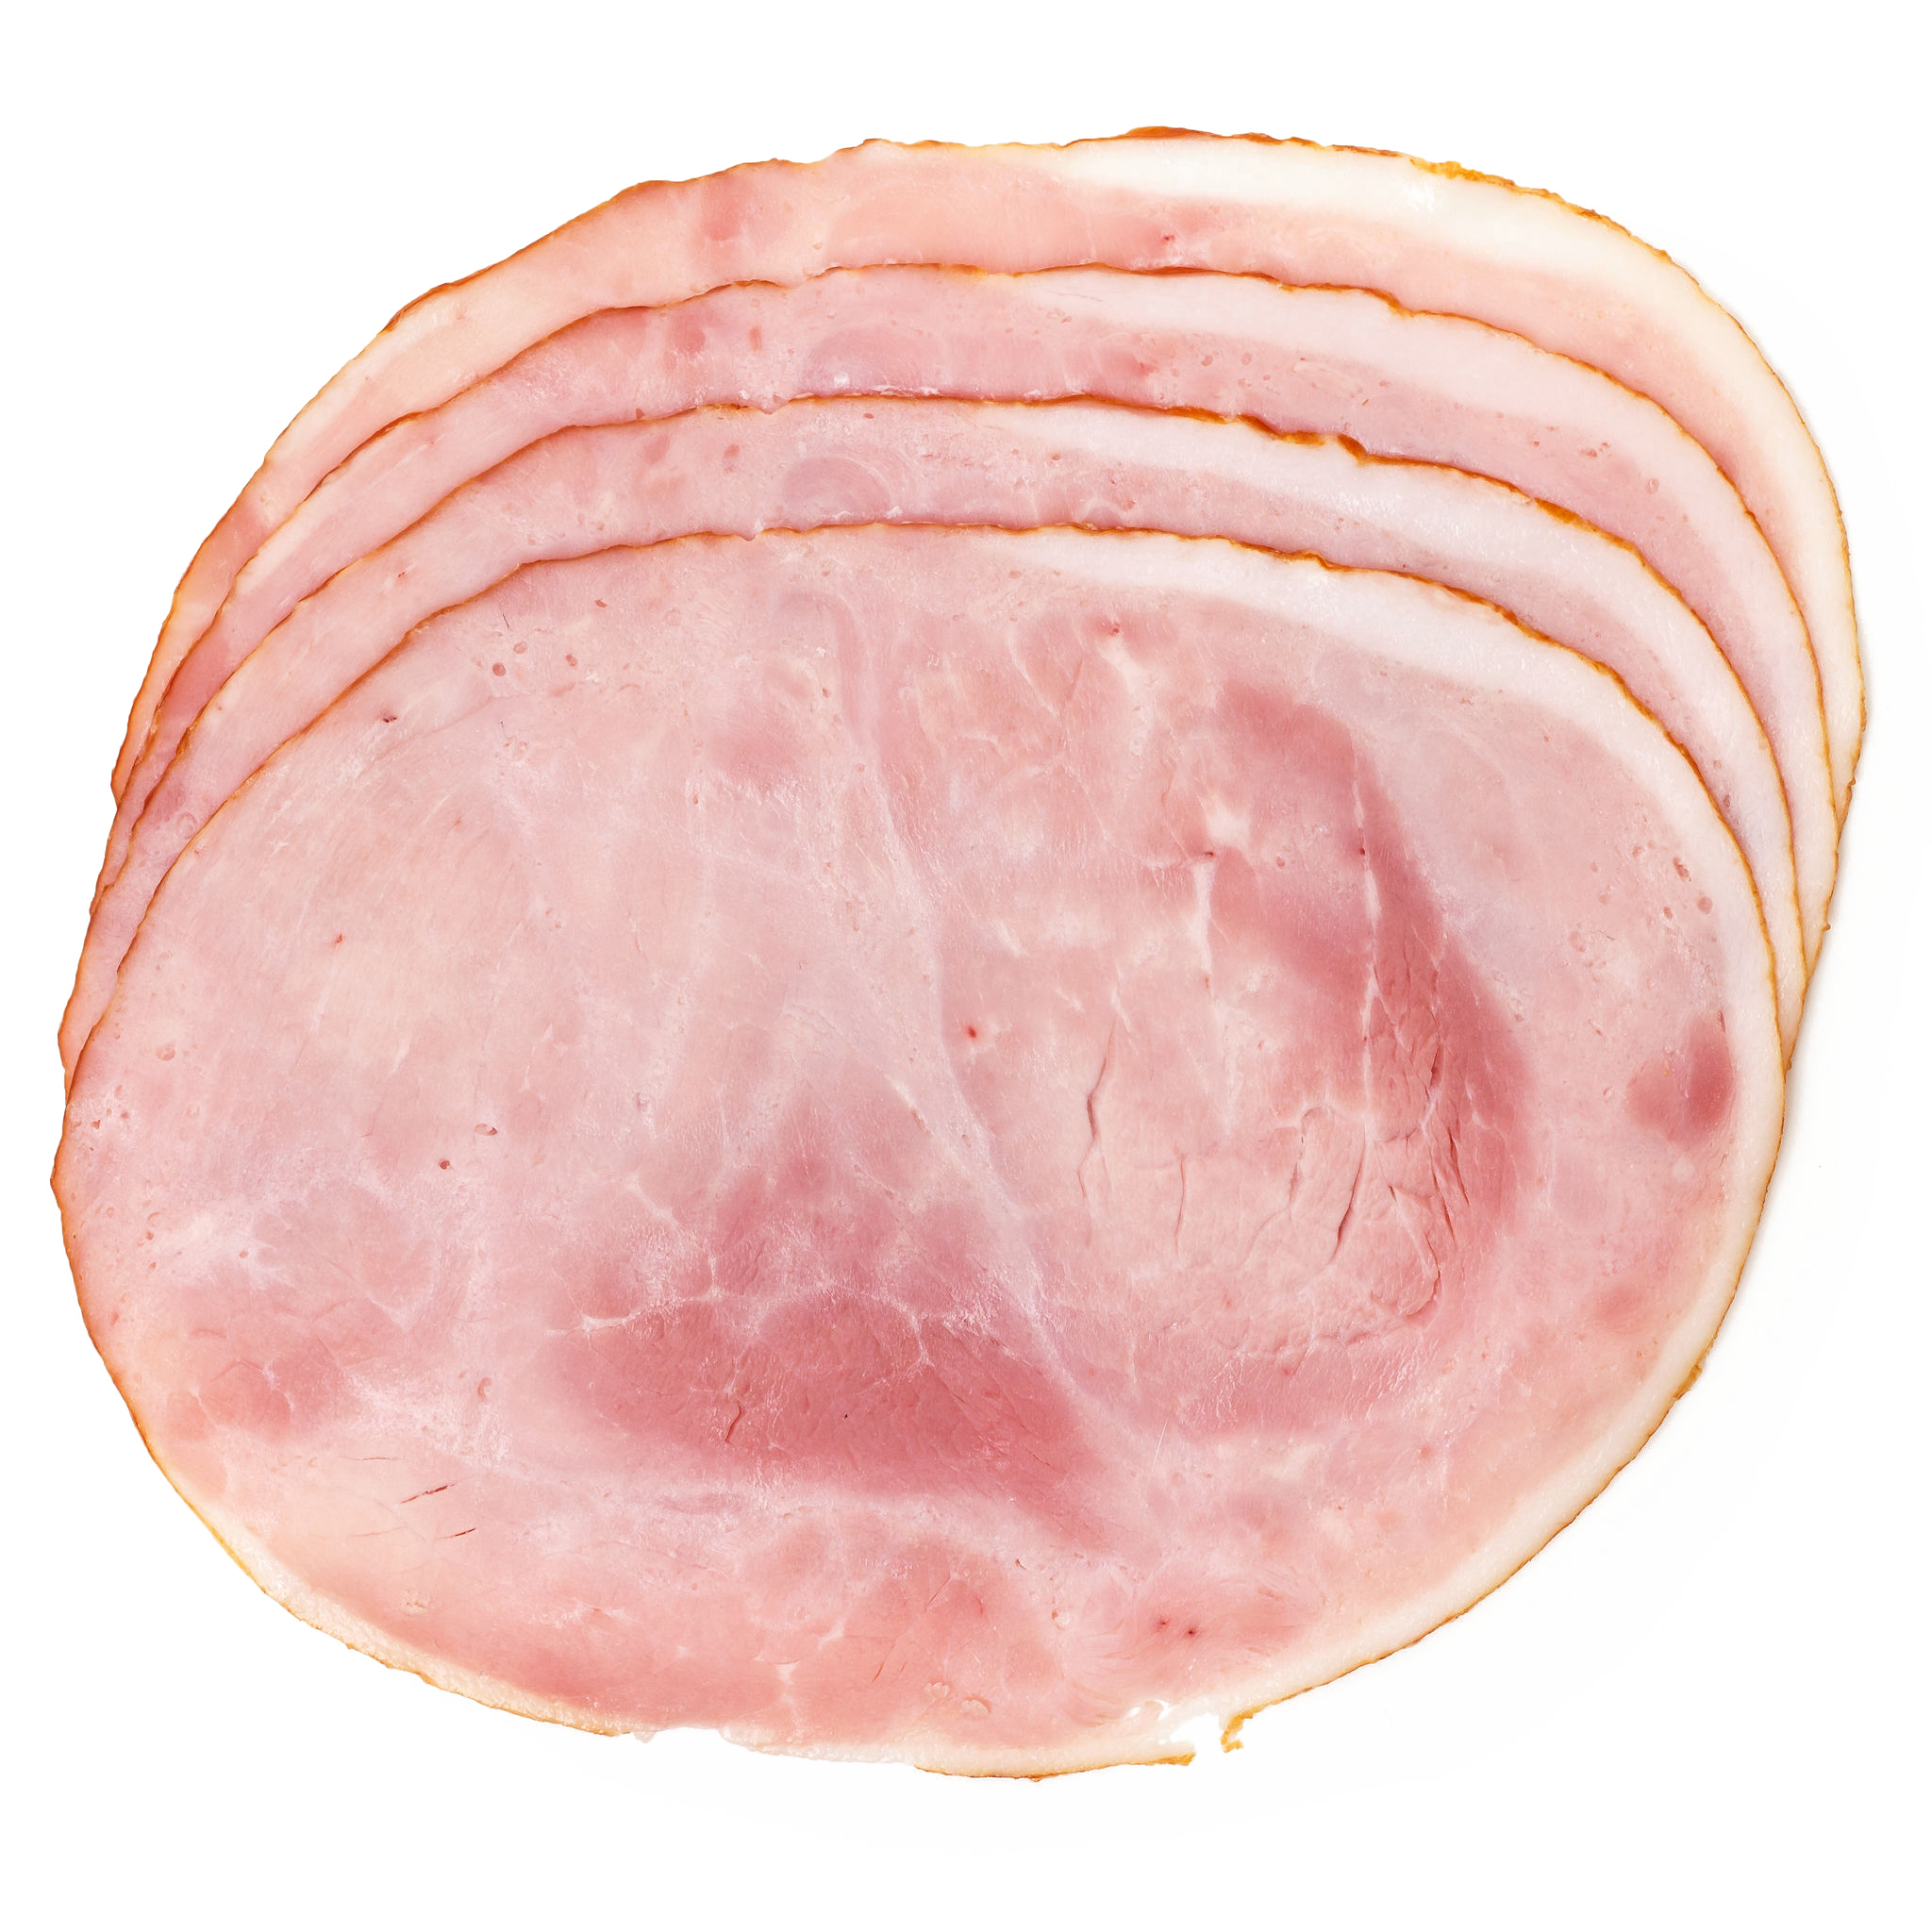 Png transparent images all. Ham clipart protein